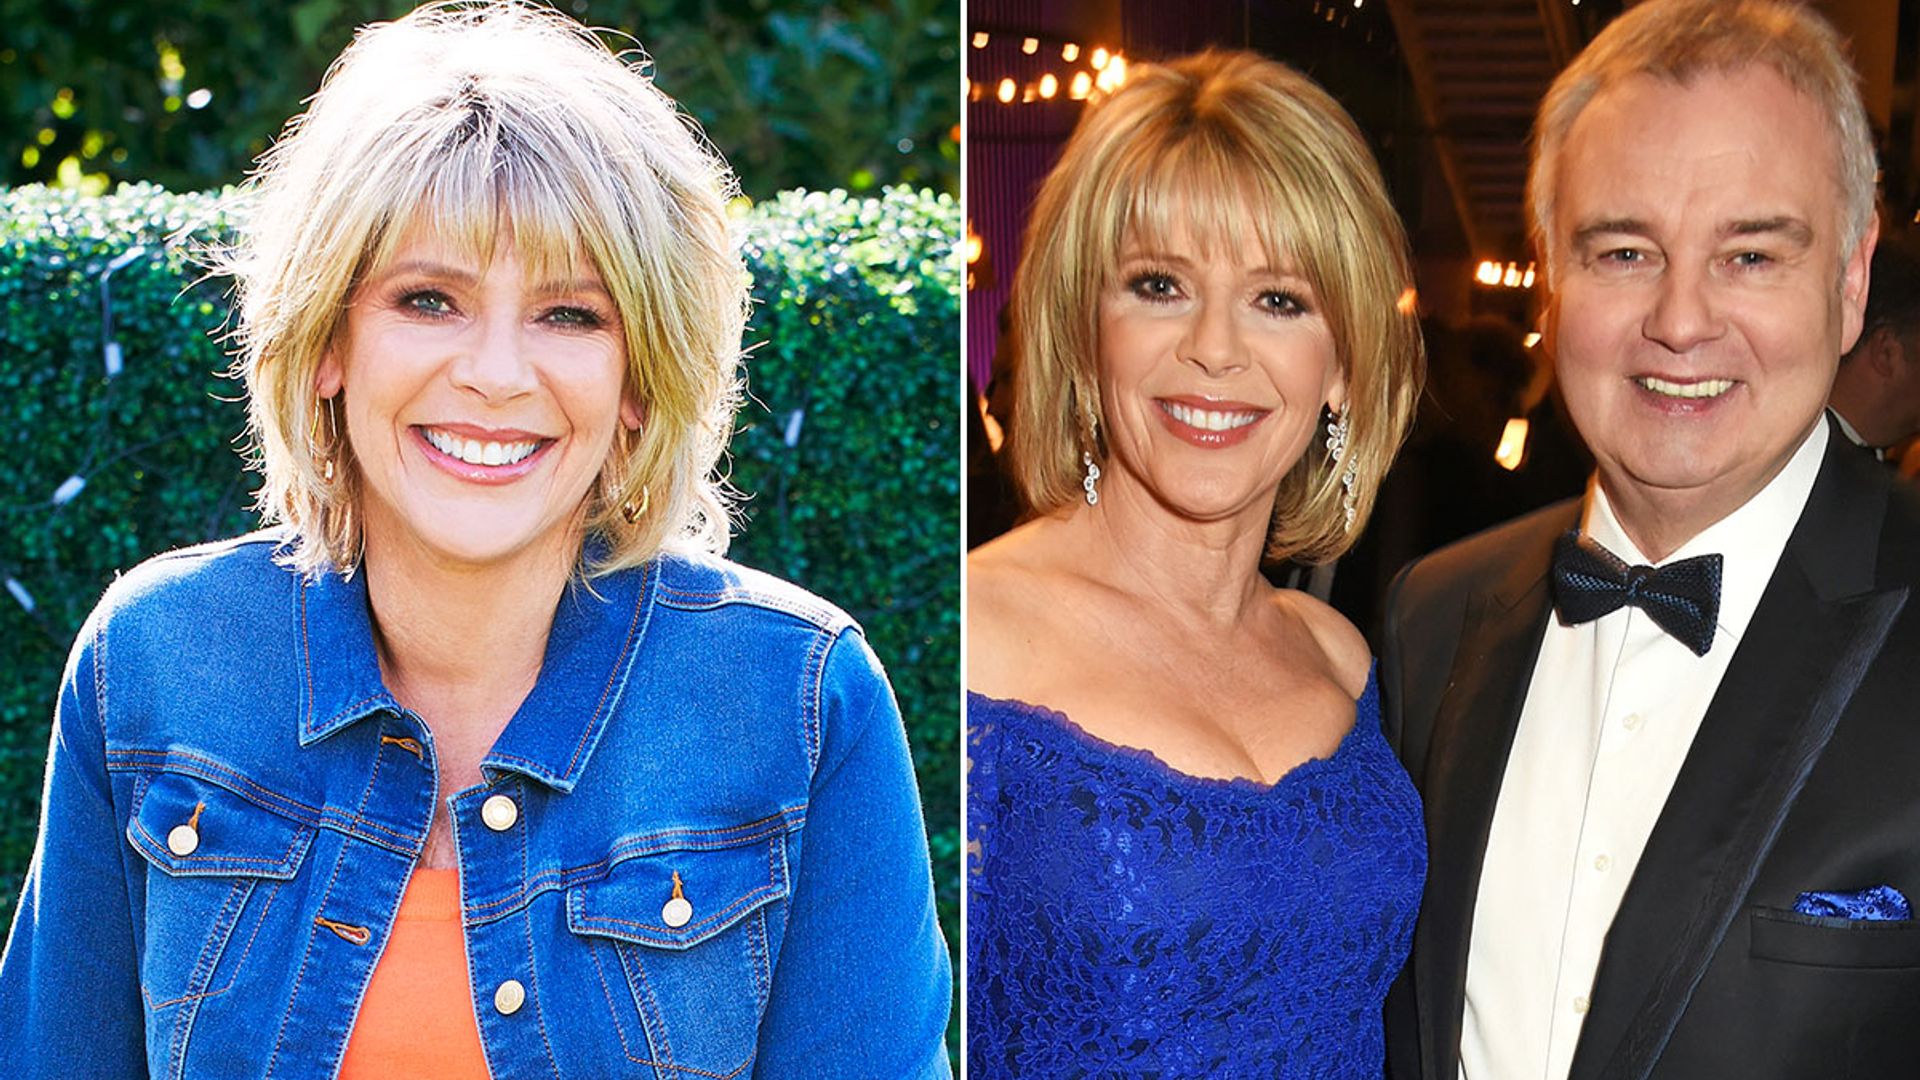 Ruth Langsford gets candid about marriage to Eamonn Holmes